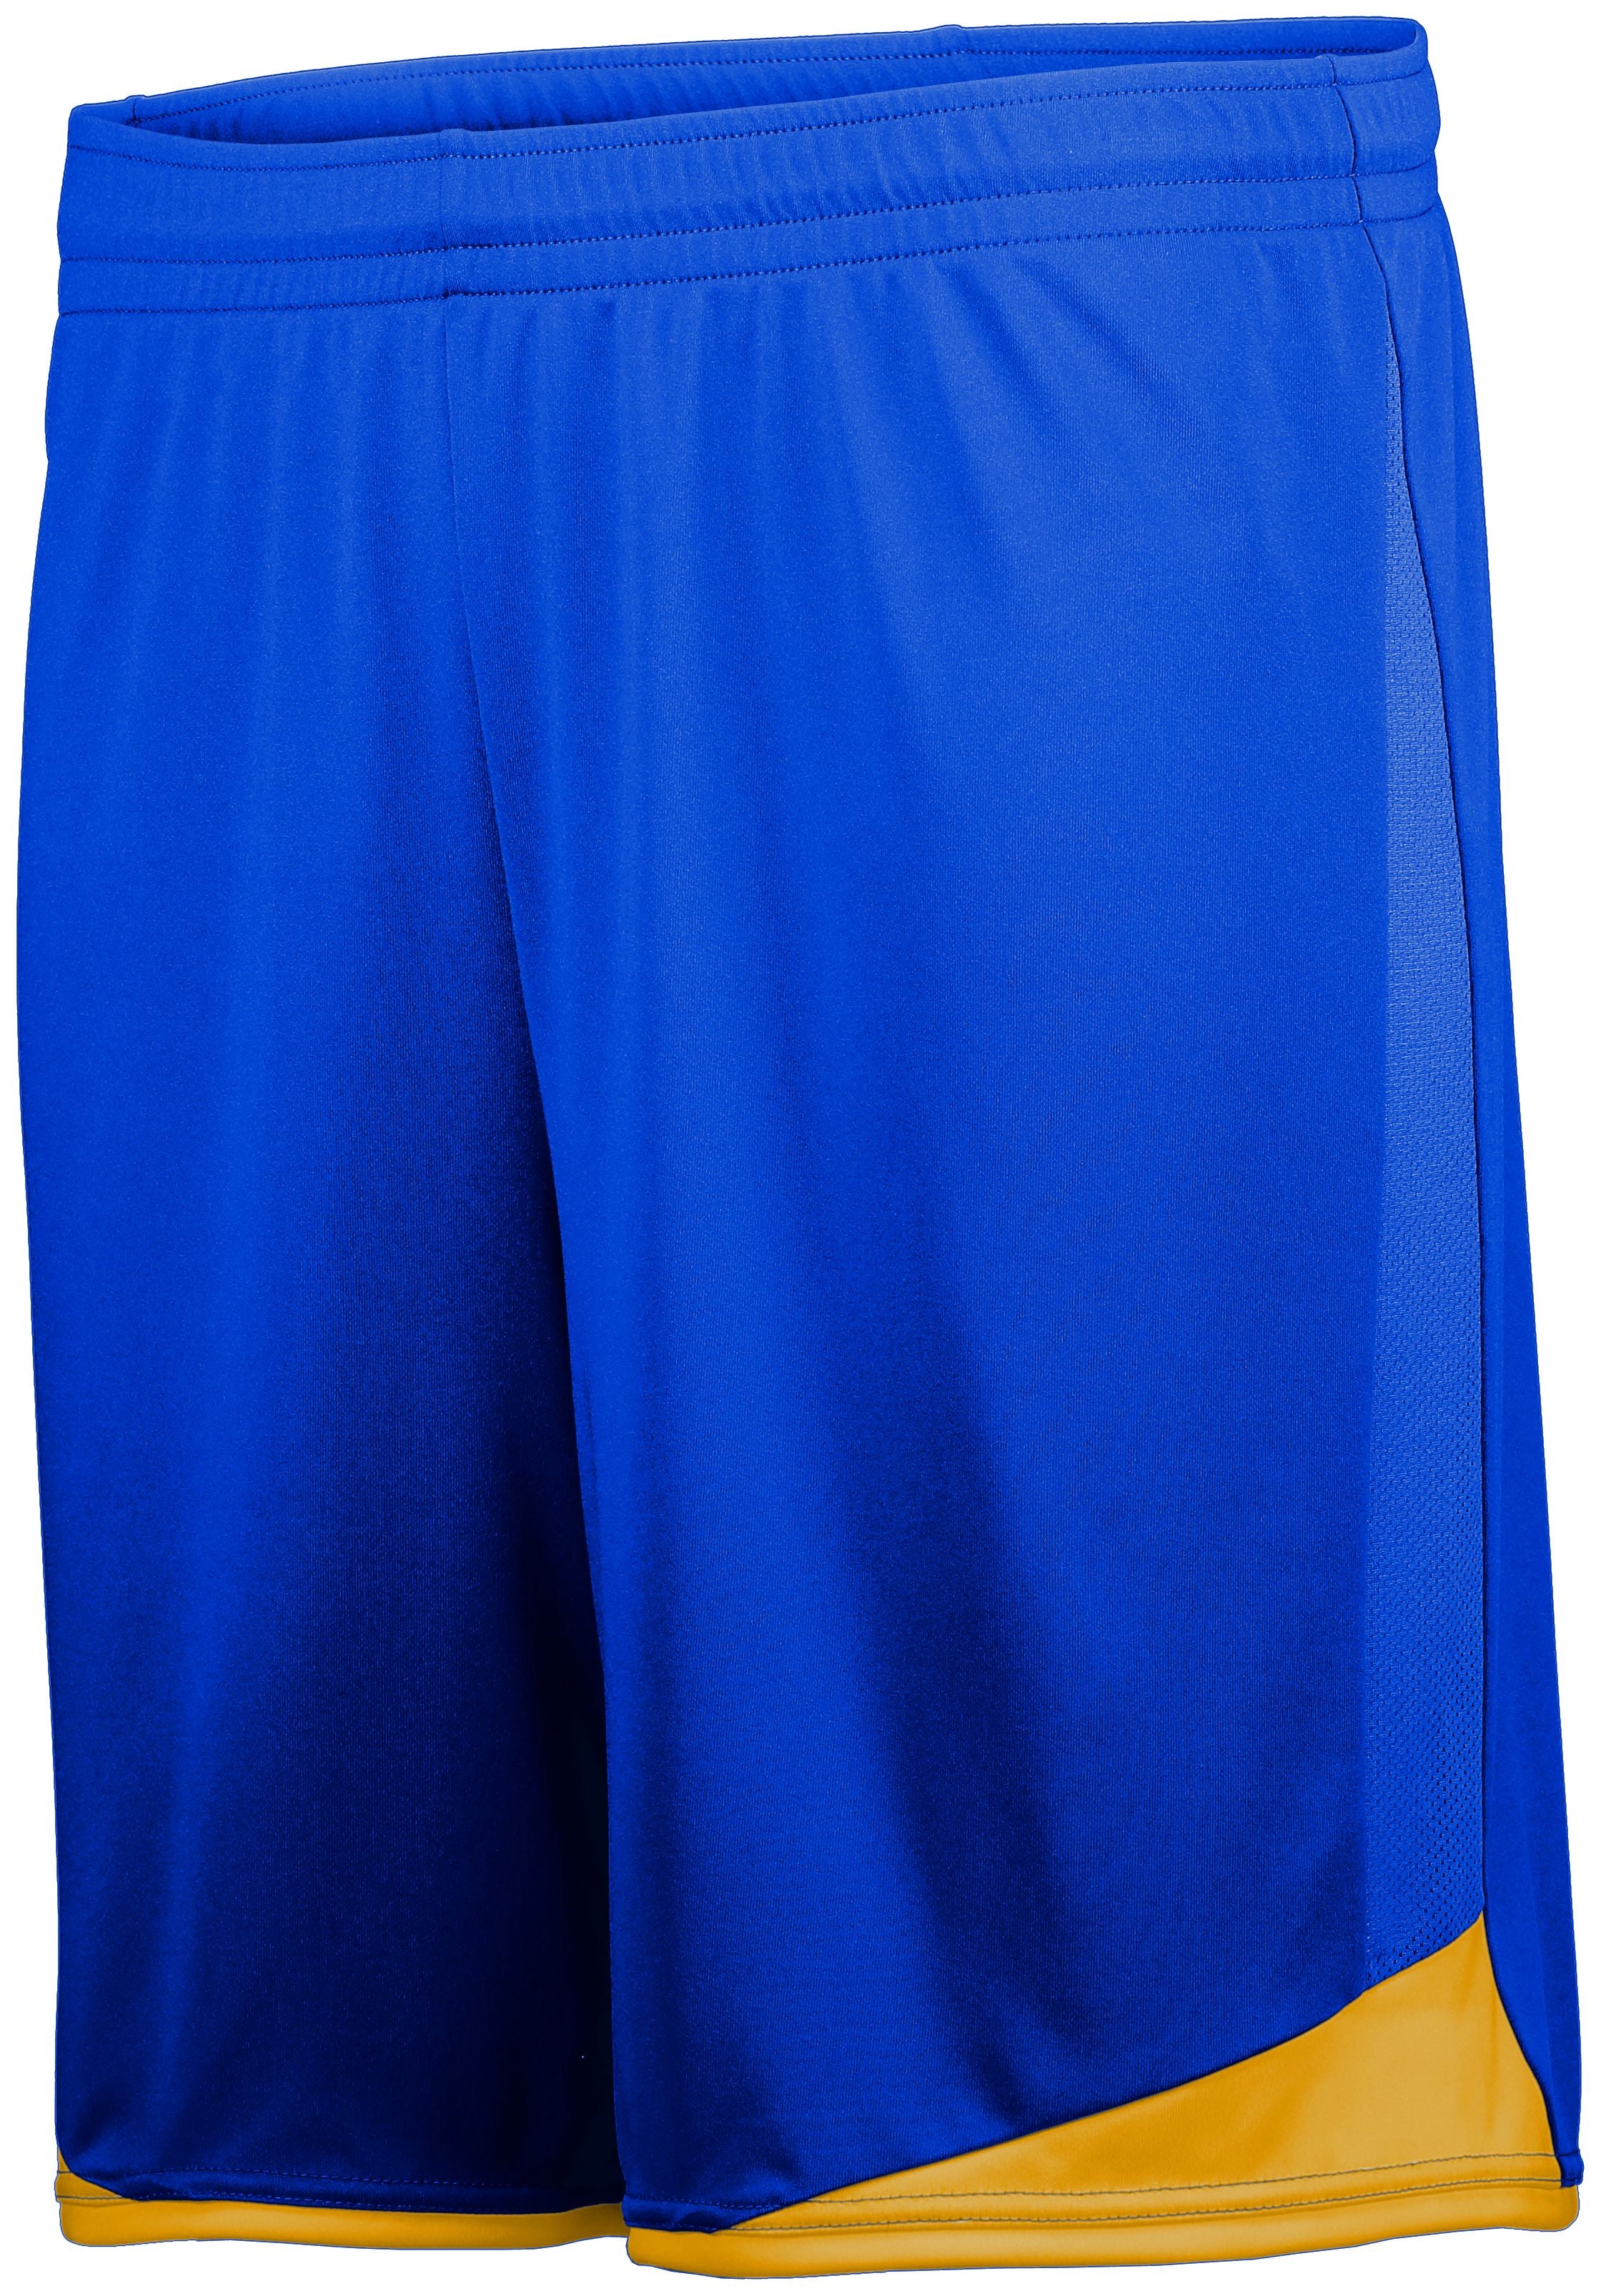 High 5 Youth Stamford Soccer Shorts in Royal/Athletic Gold  -Part of the Youth, Youth-Shorts, High5-Products, Soccer, All-Sports-1 product lines at KanaleyCreations.com